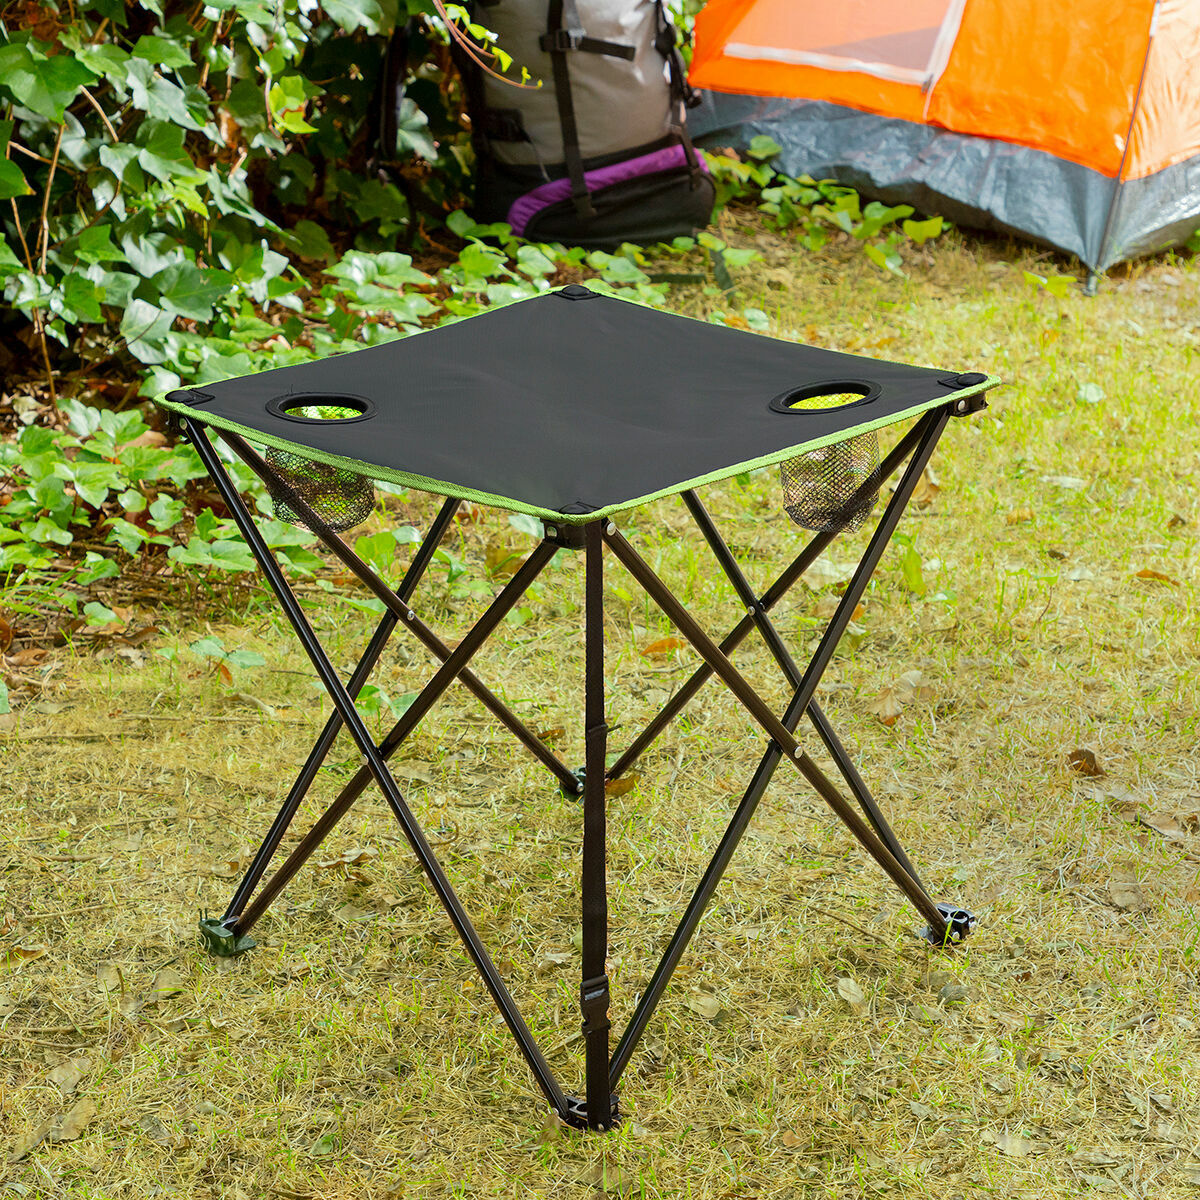 Inklapbare stoffen campingtafel met hoes Cafolby InnovaGoods